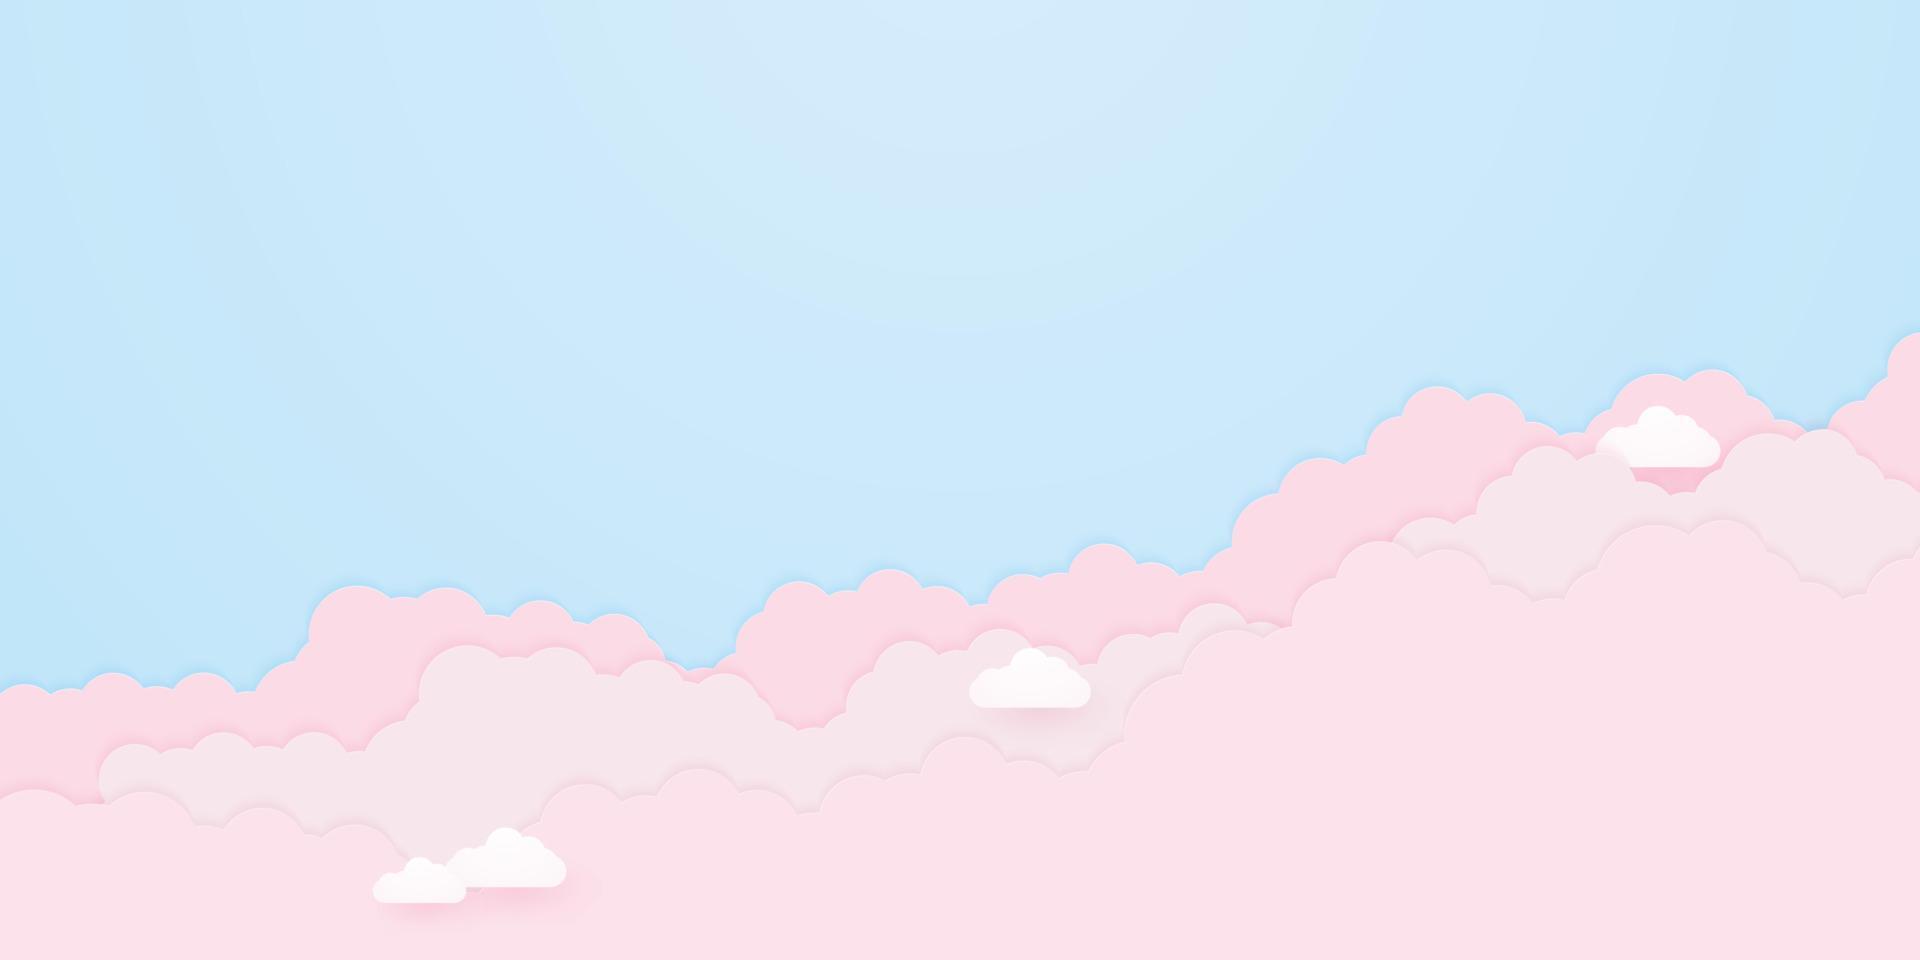 Cloudscape, blue sky with pink clouds , paper art style vector